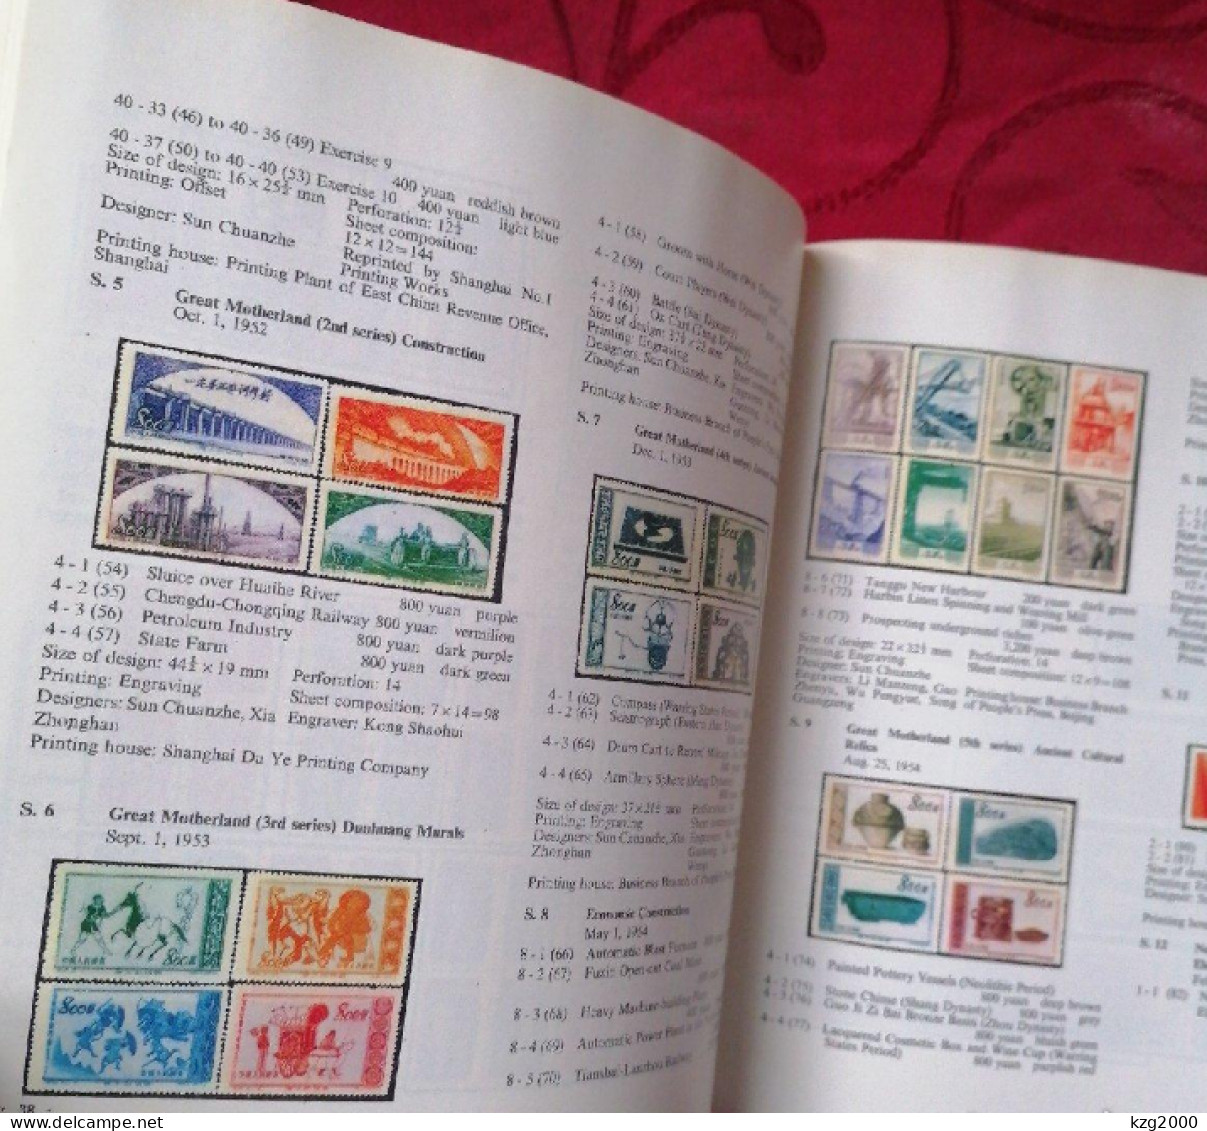 China 1949-1980 Catalogue of Stamps of the People's Republic of China (English Version)